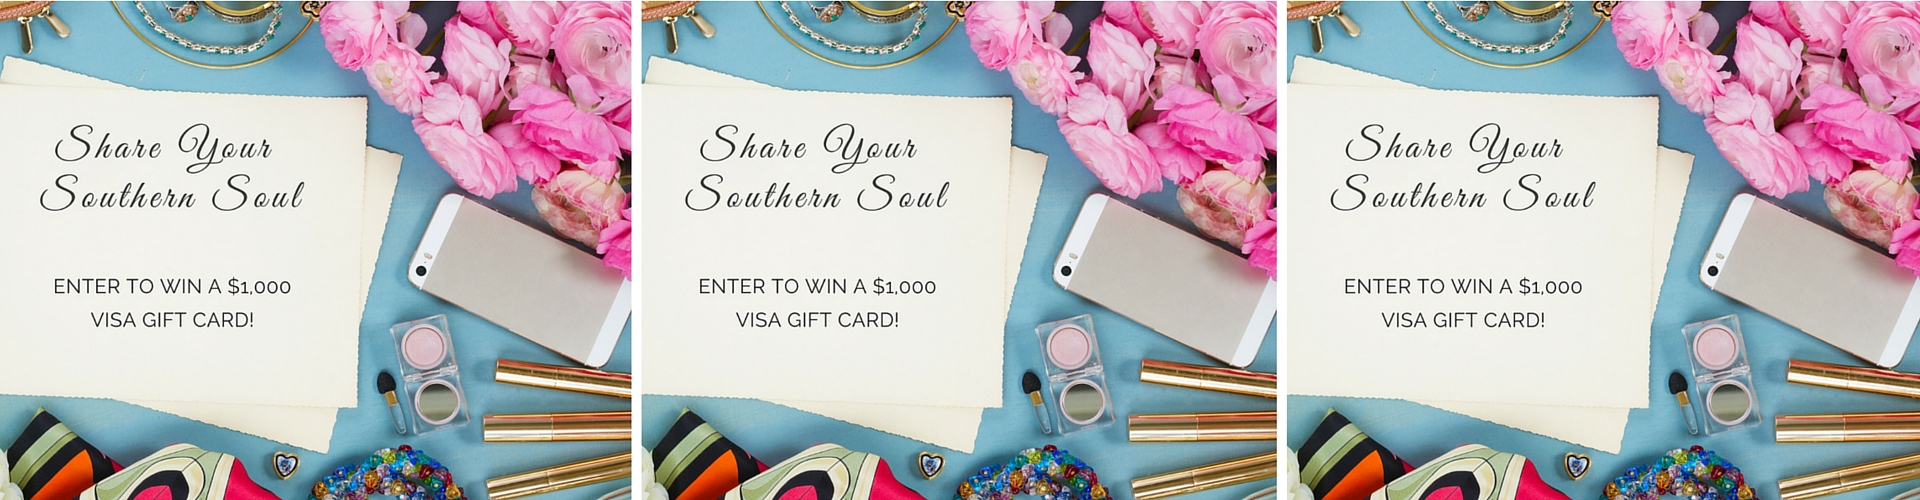 Share Your Southern Soul & Win $1000!